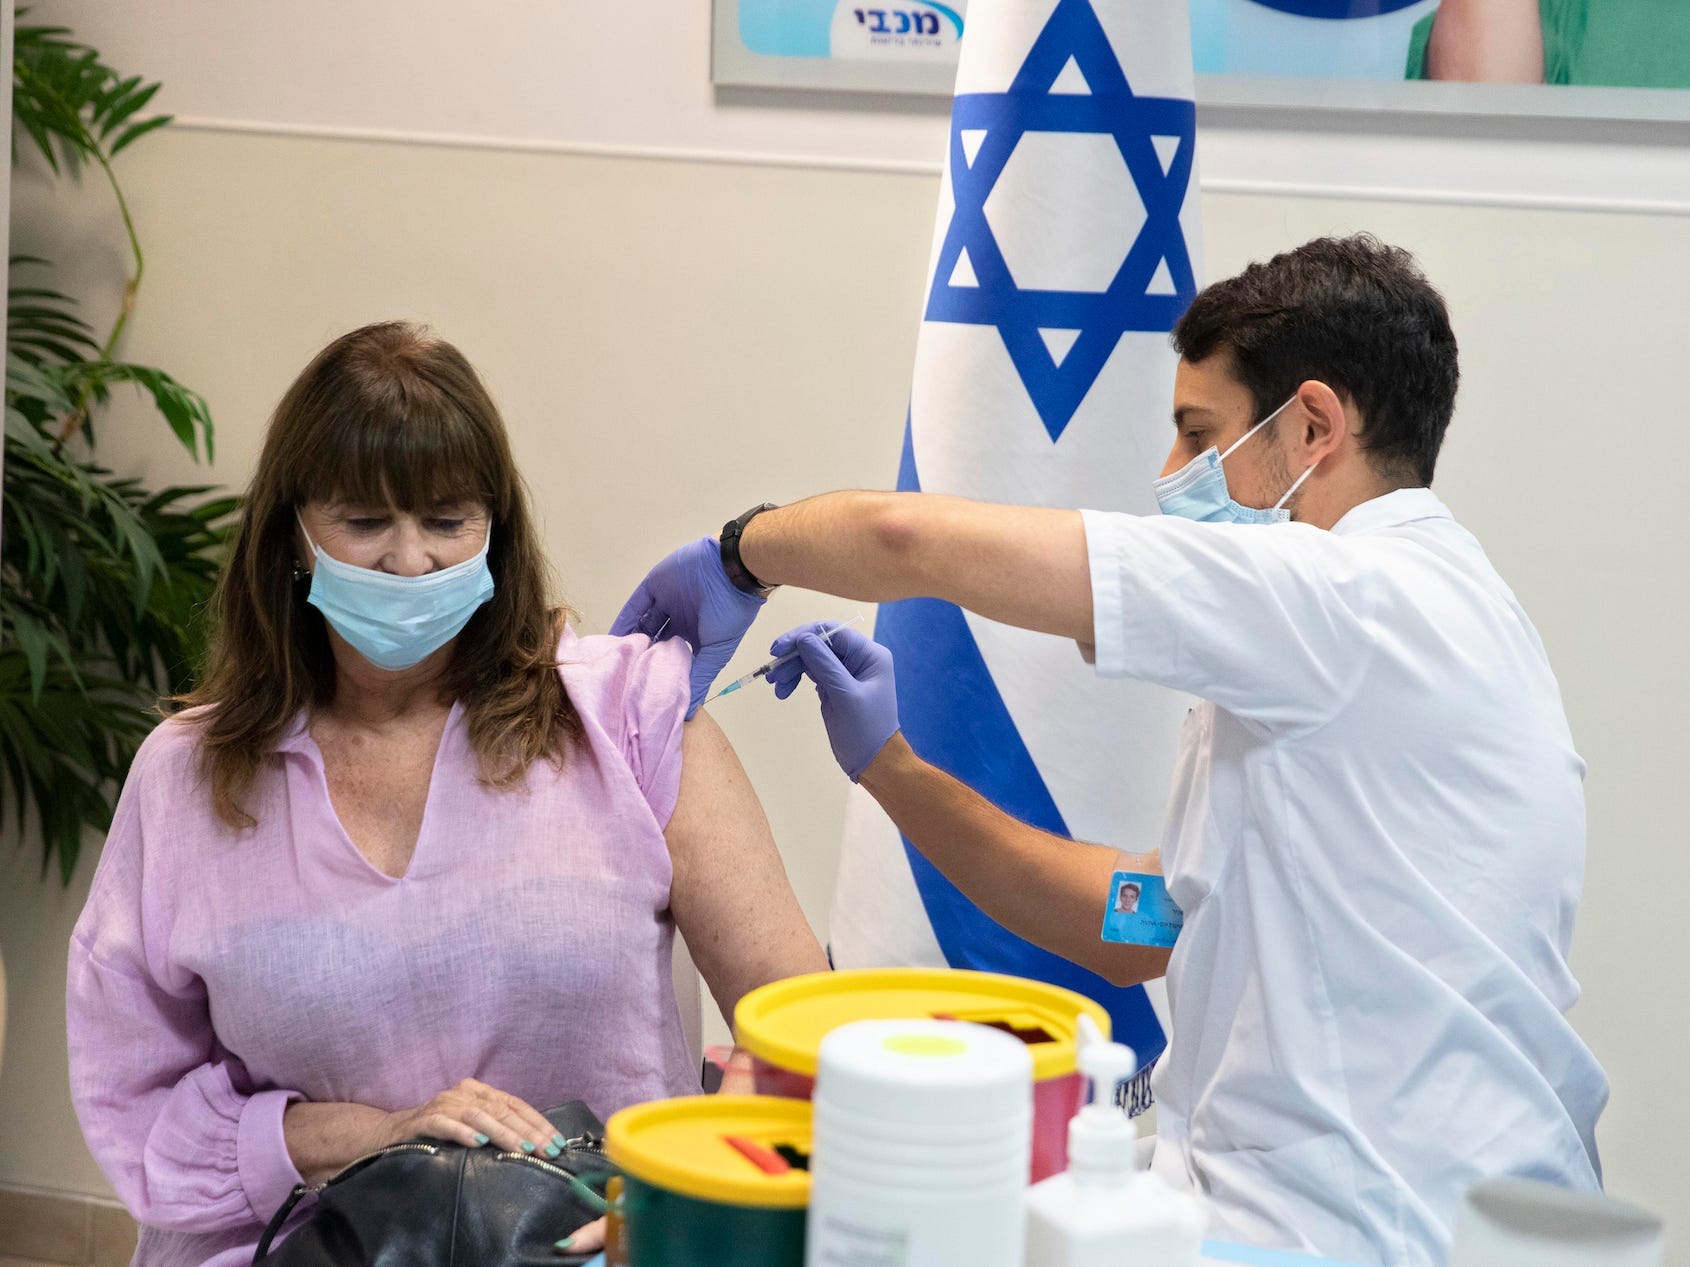 A masked woman wearing a purple shirt is getting vaccinated by a man in scrubs wearing a mask in front of an Israeli flag